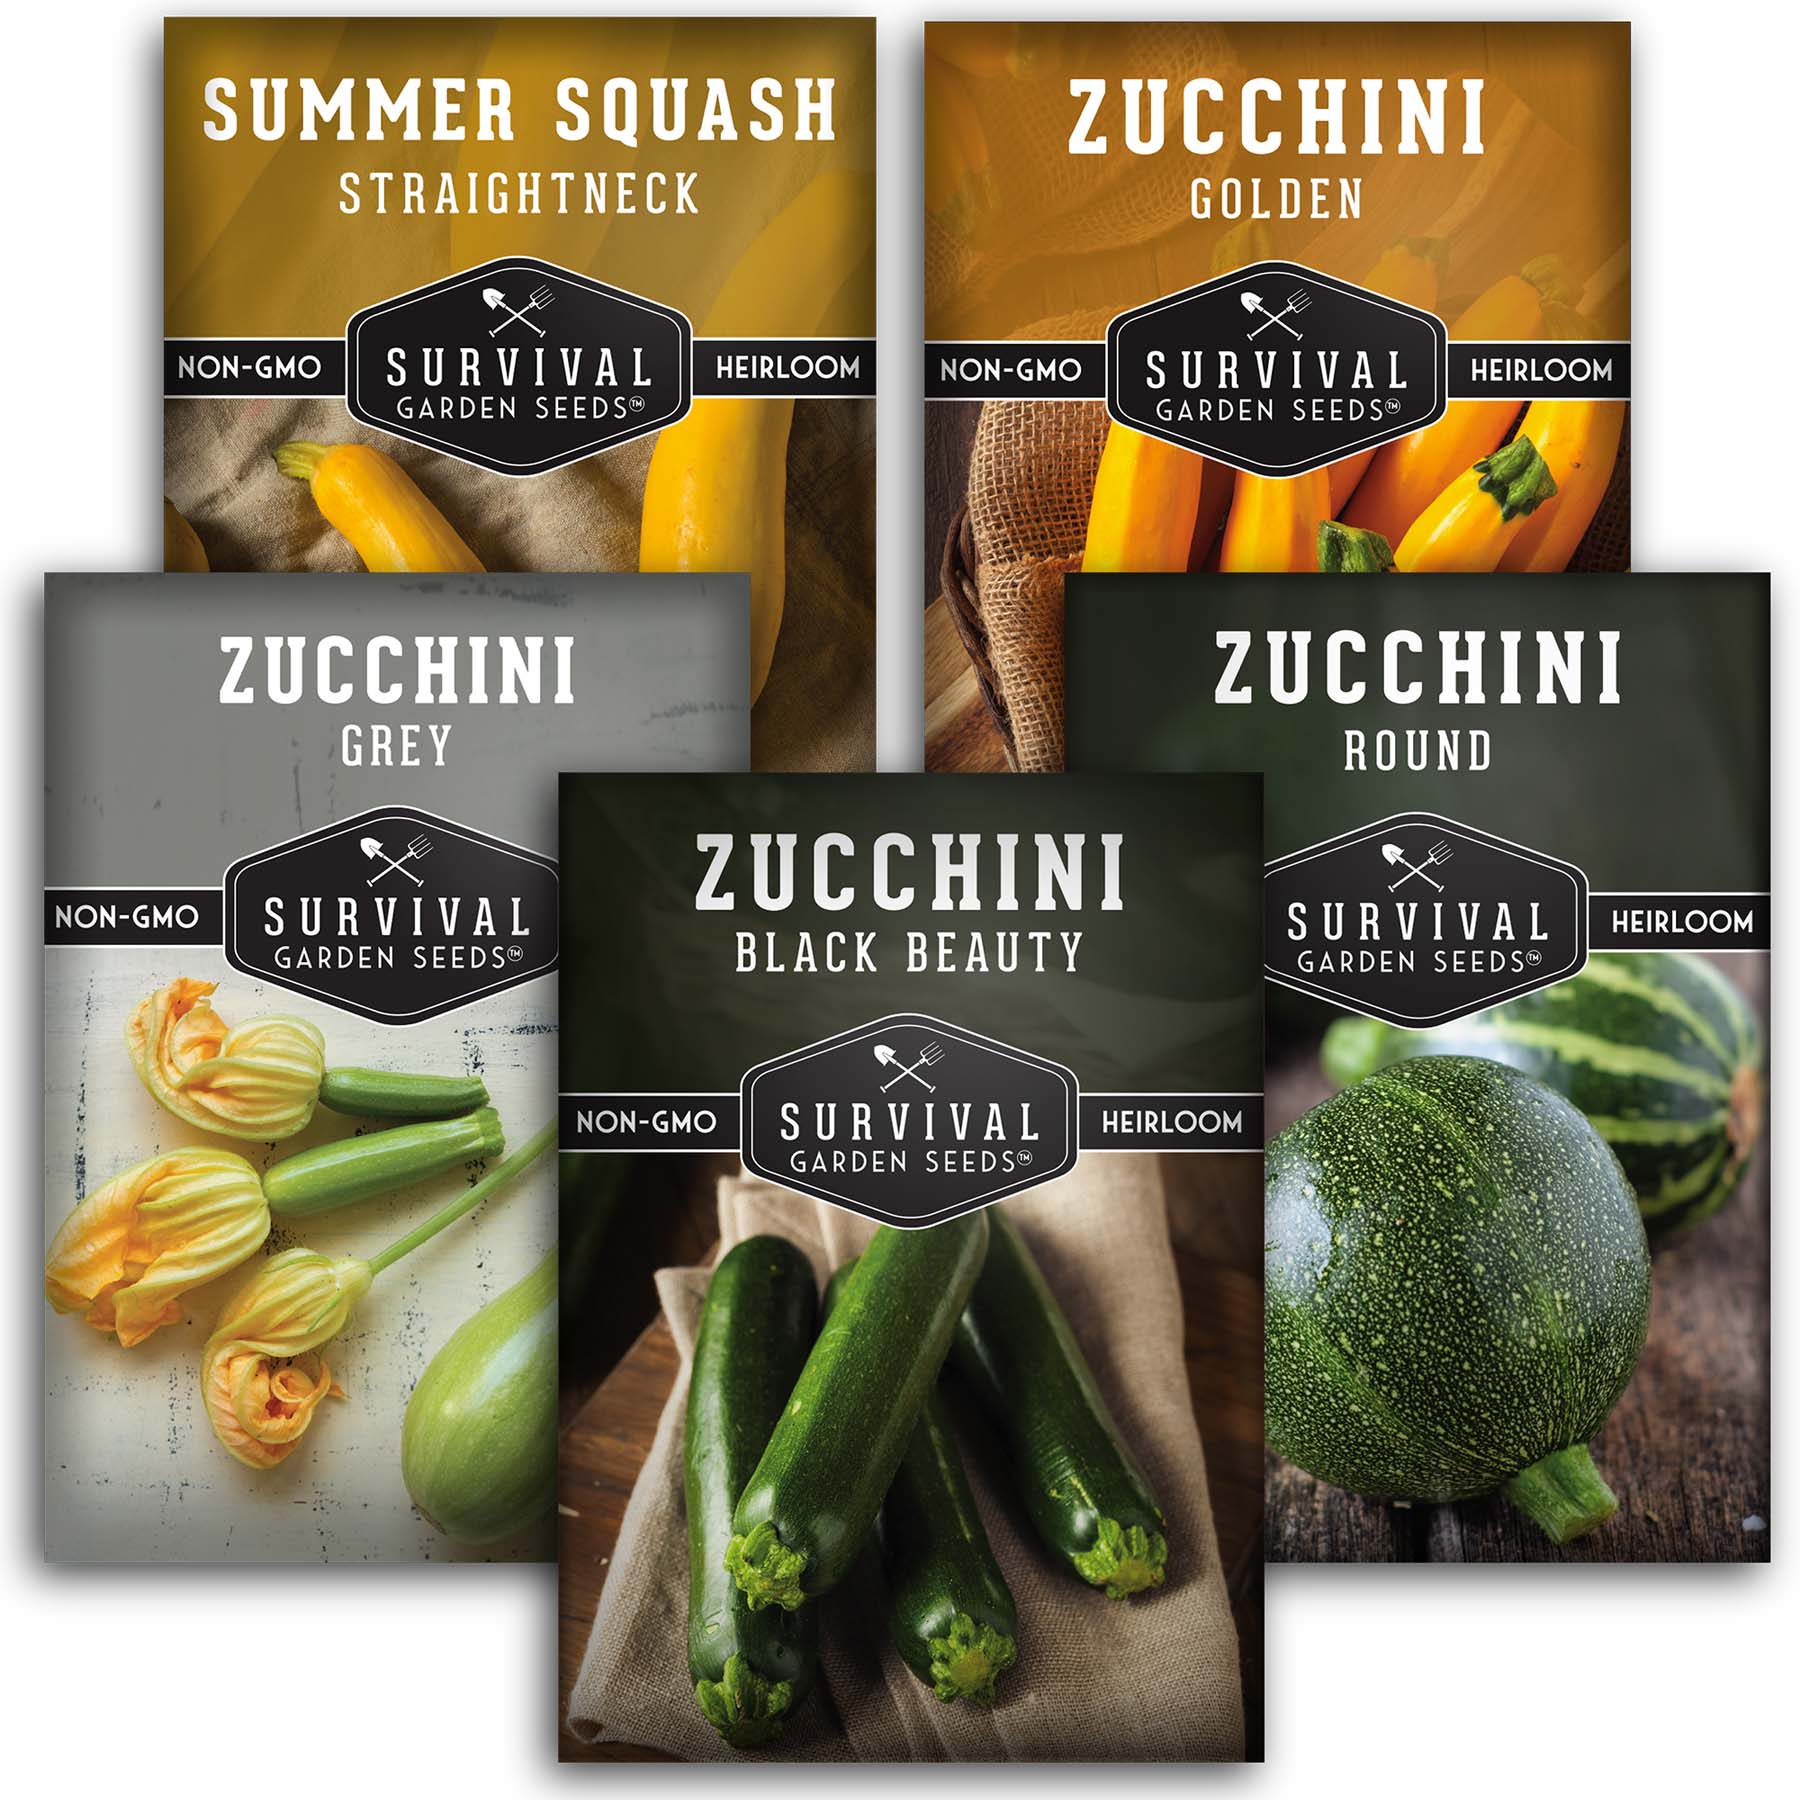 Zucchini and Squash Heirloom seed collection